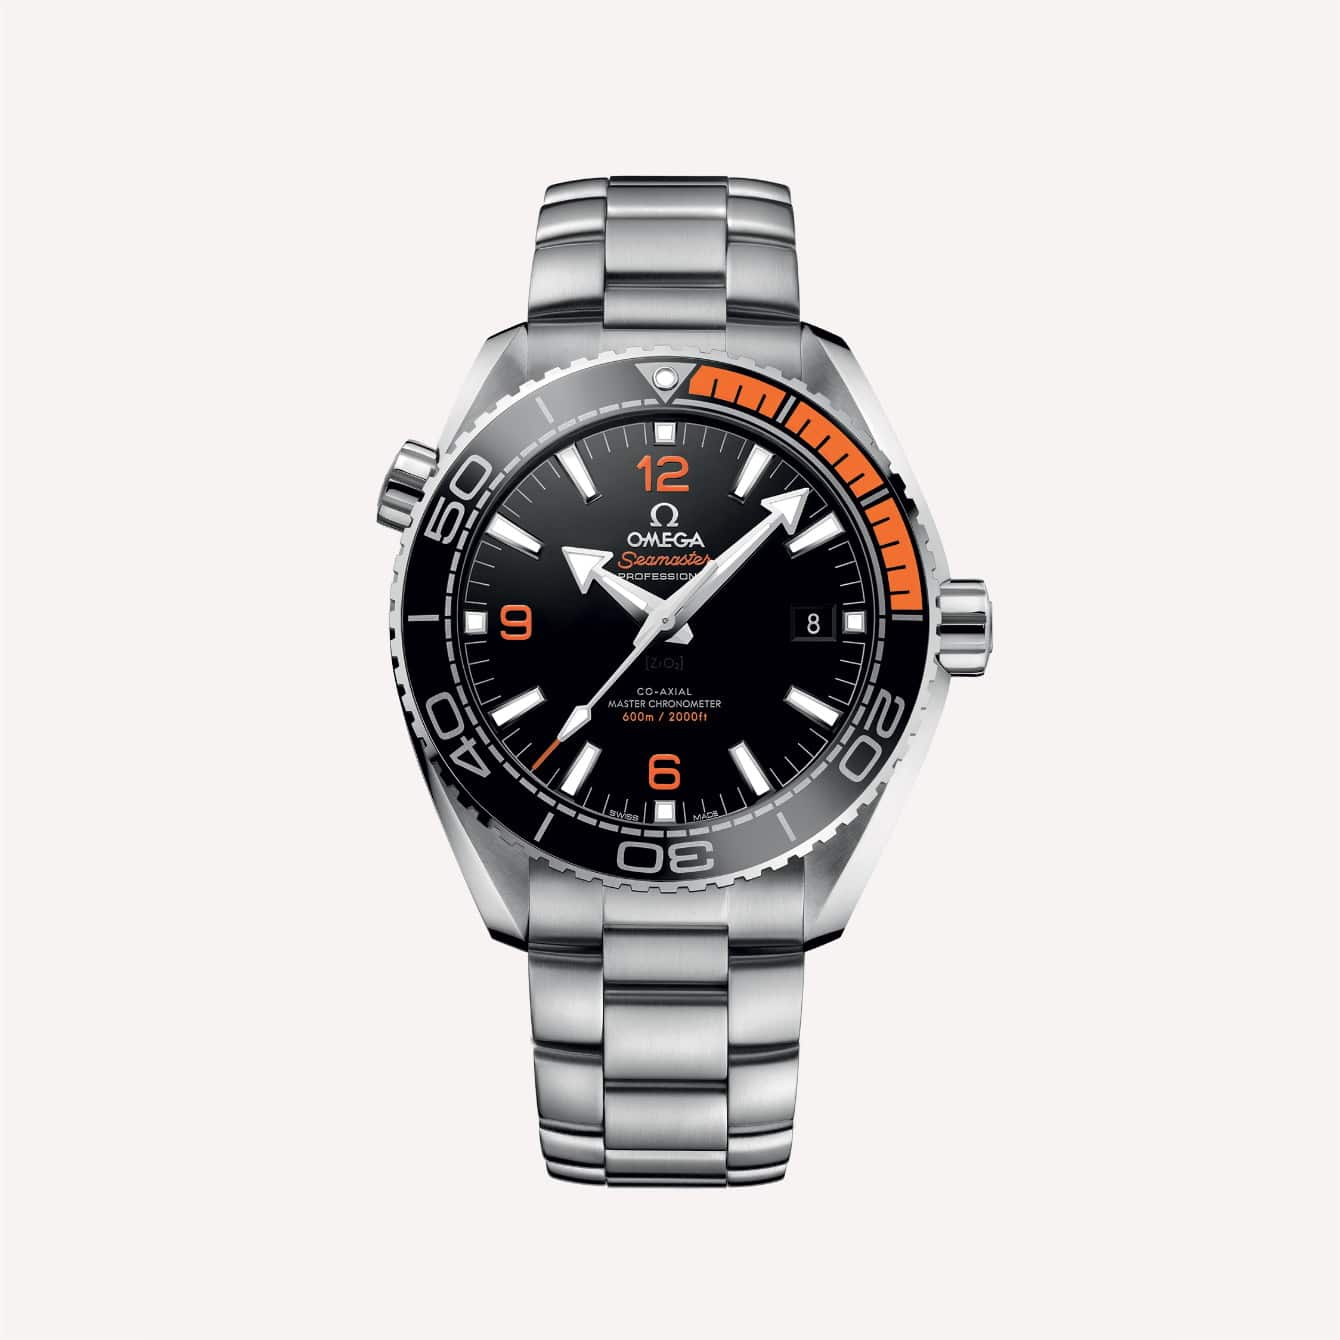 Omega Seamaster Planet Ocean 600M Diver Watch